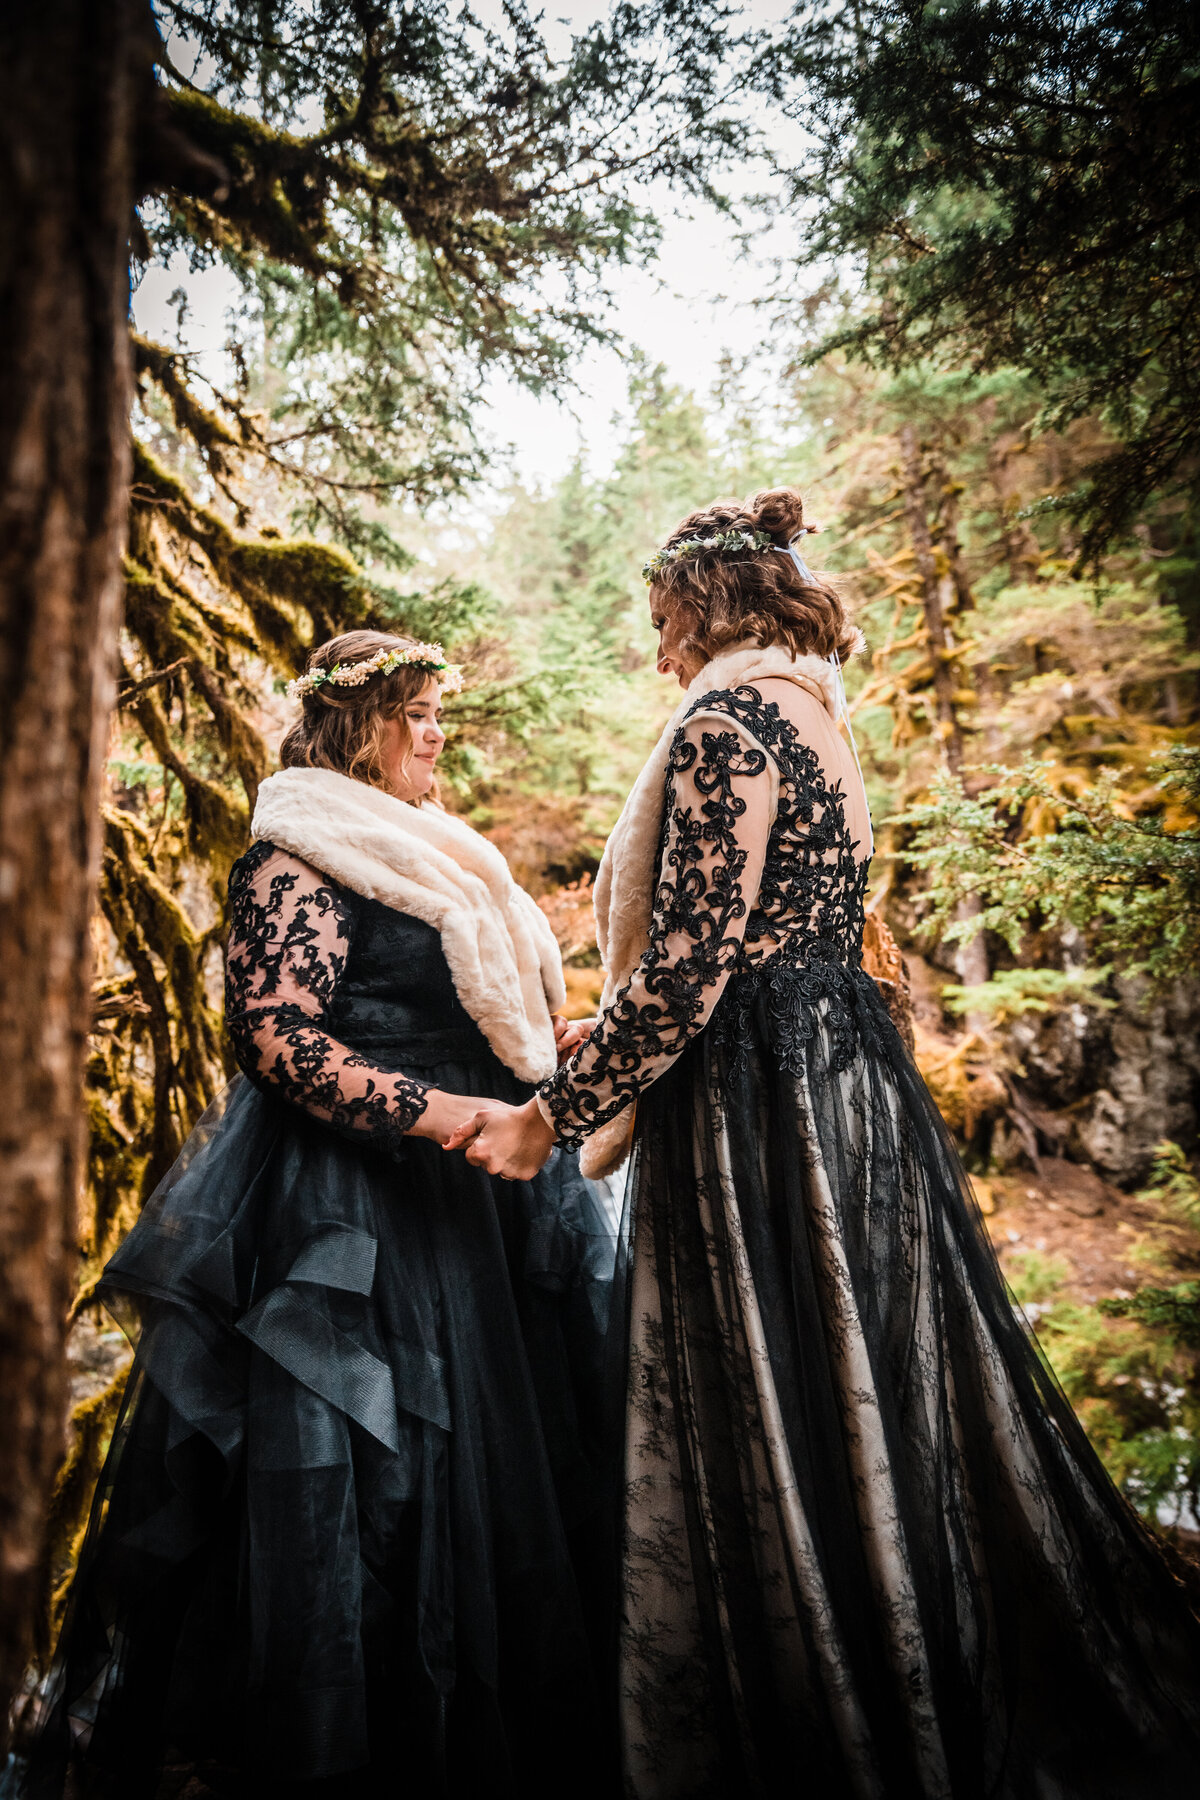 Two brides, both in black wedding gowns, hold hands while exchanging vows during their elopement ceremony